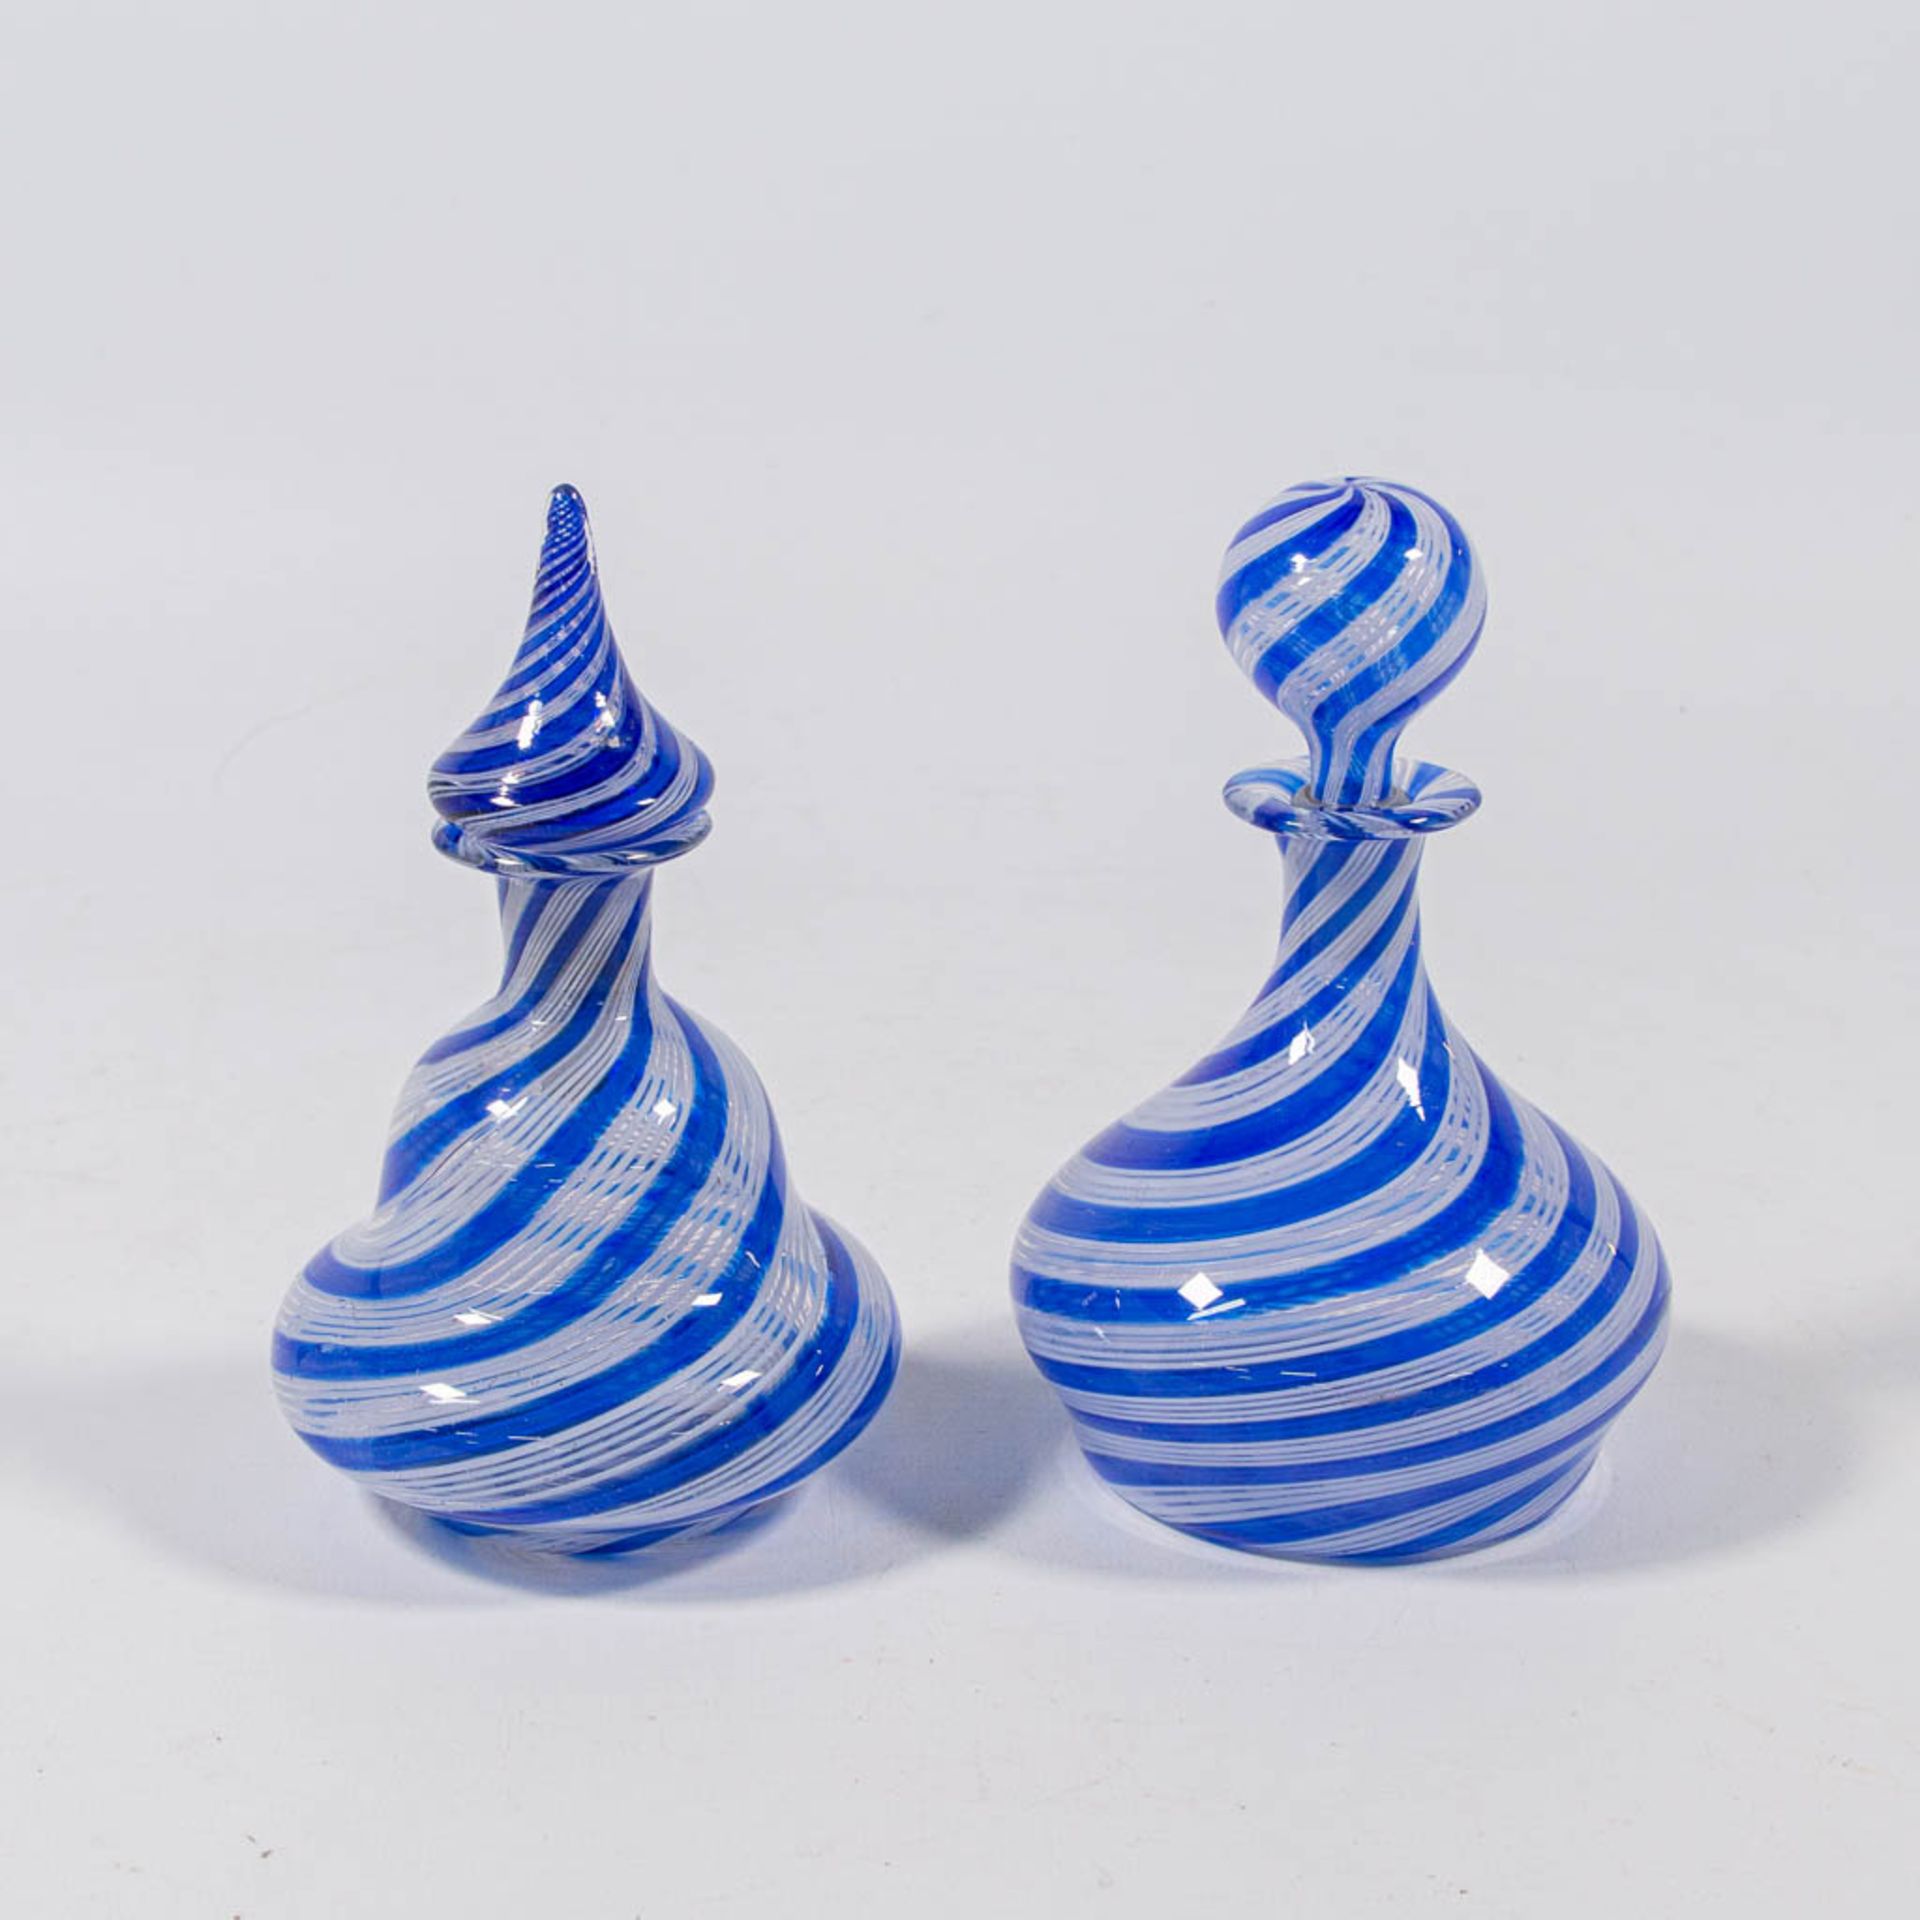 A pair of decanters with stopper, made in Murano, Italy around 1950. (15 x 9 cm) - Image 4 of 17